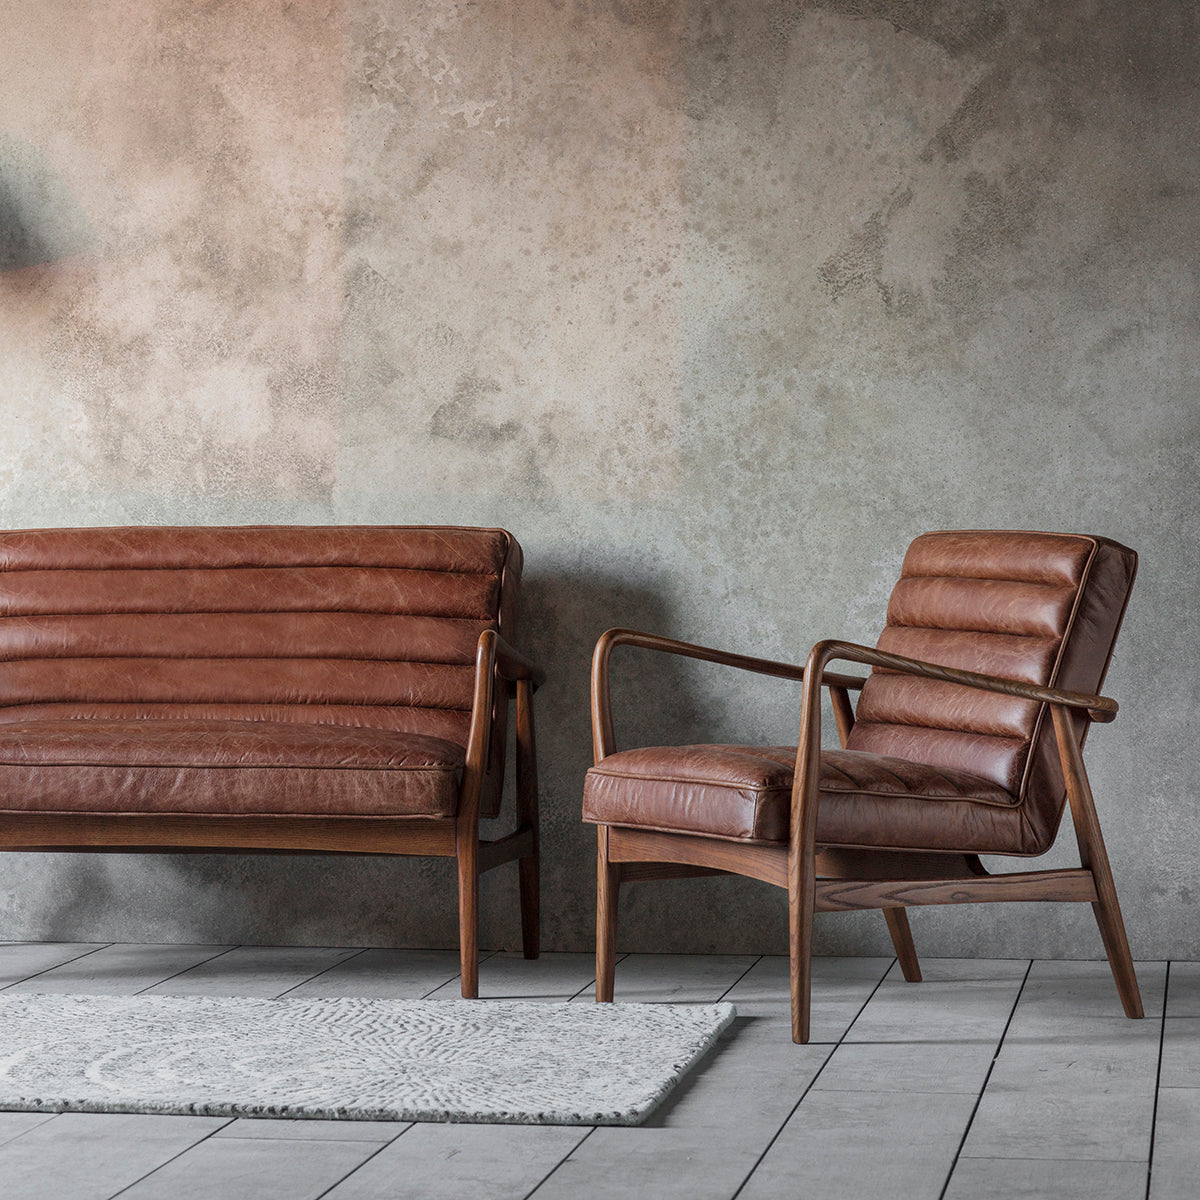 Load image into Gallery viewer, A pair of vintage brown leather armchairs from Kikiathome.co.uk in front of a concrete wall, perfect for interior decor.
